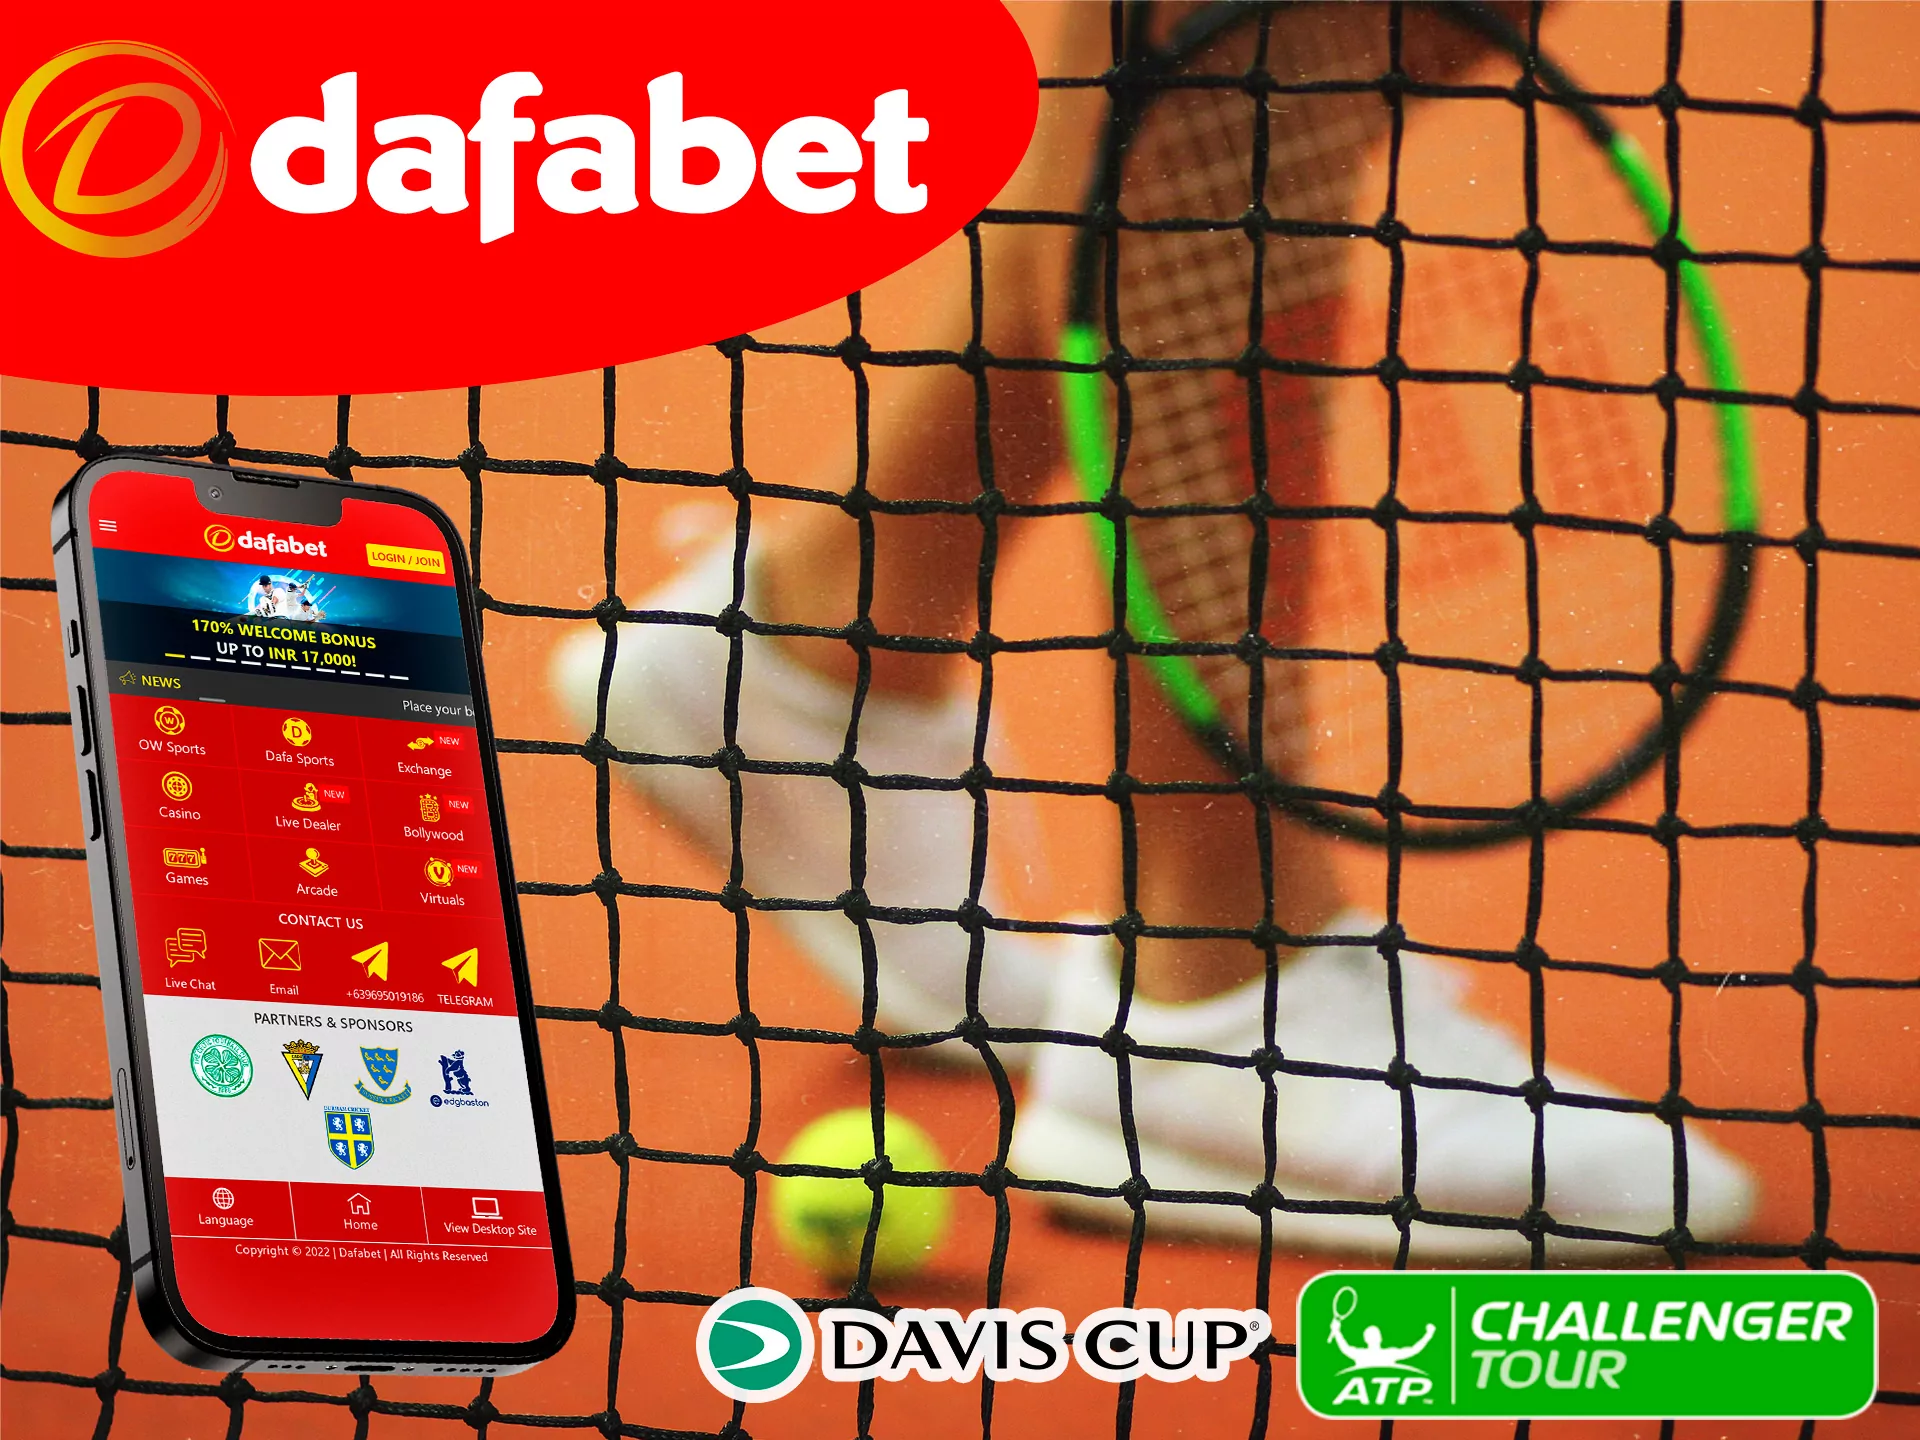 Dafabet has an excellent betting field, bets are available on Head to Head - Match, Asian Handicap - Sets - Match, Exact Number of Sets - Match and Correct Score.